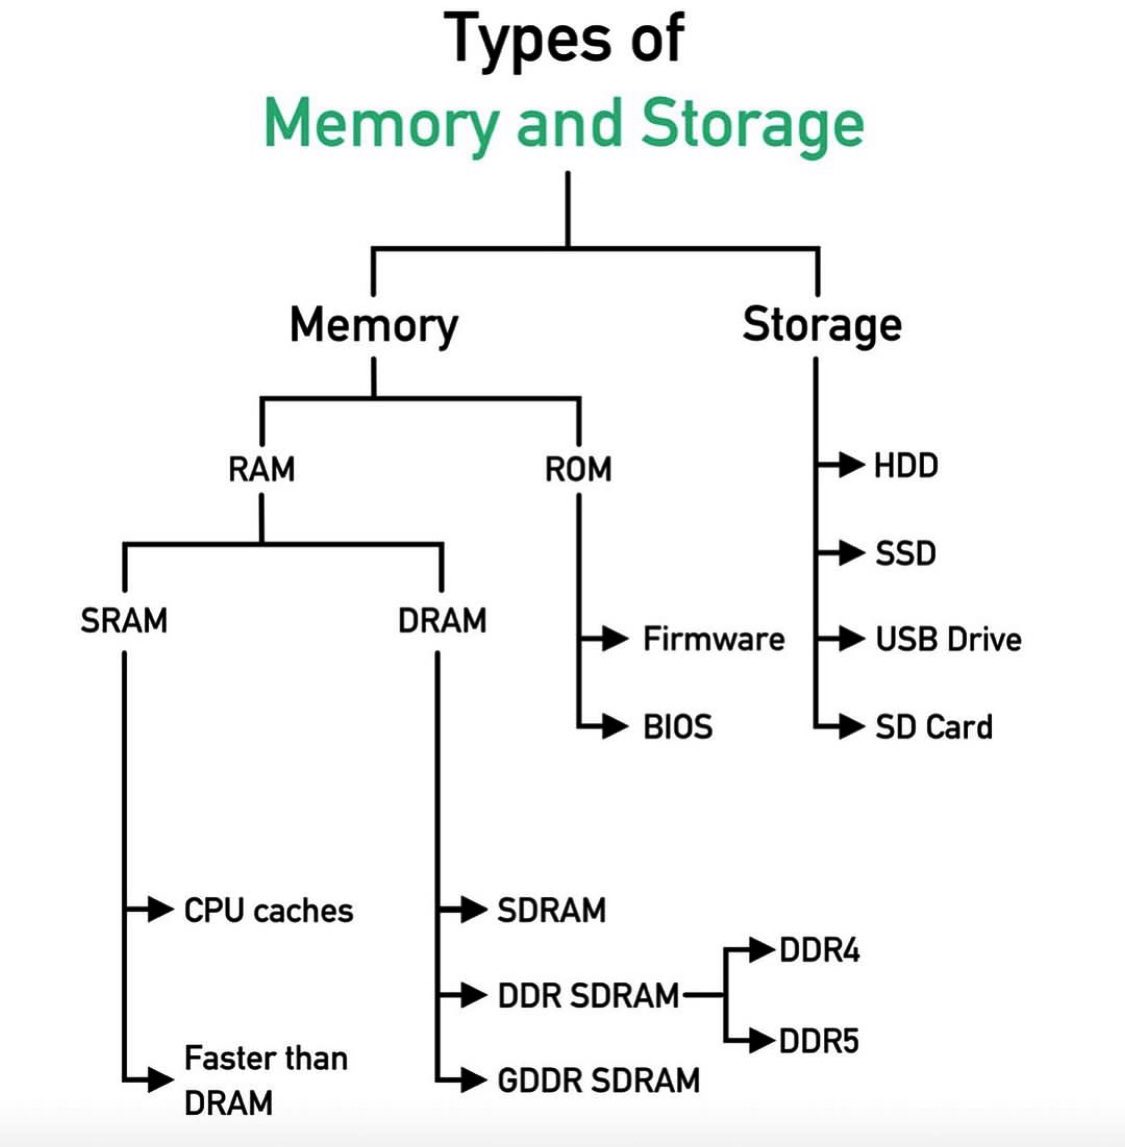 Types of Memory and Storage